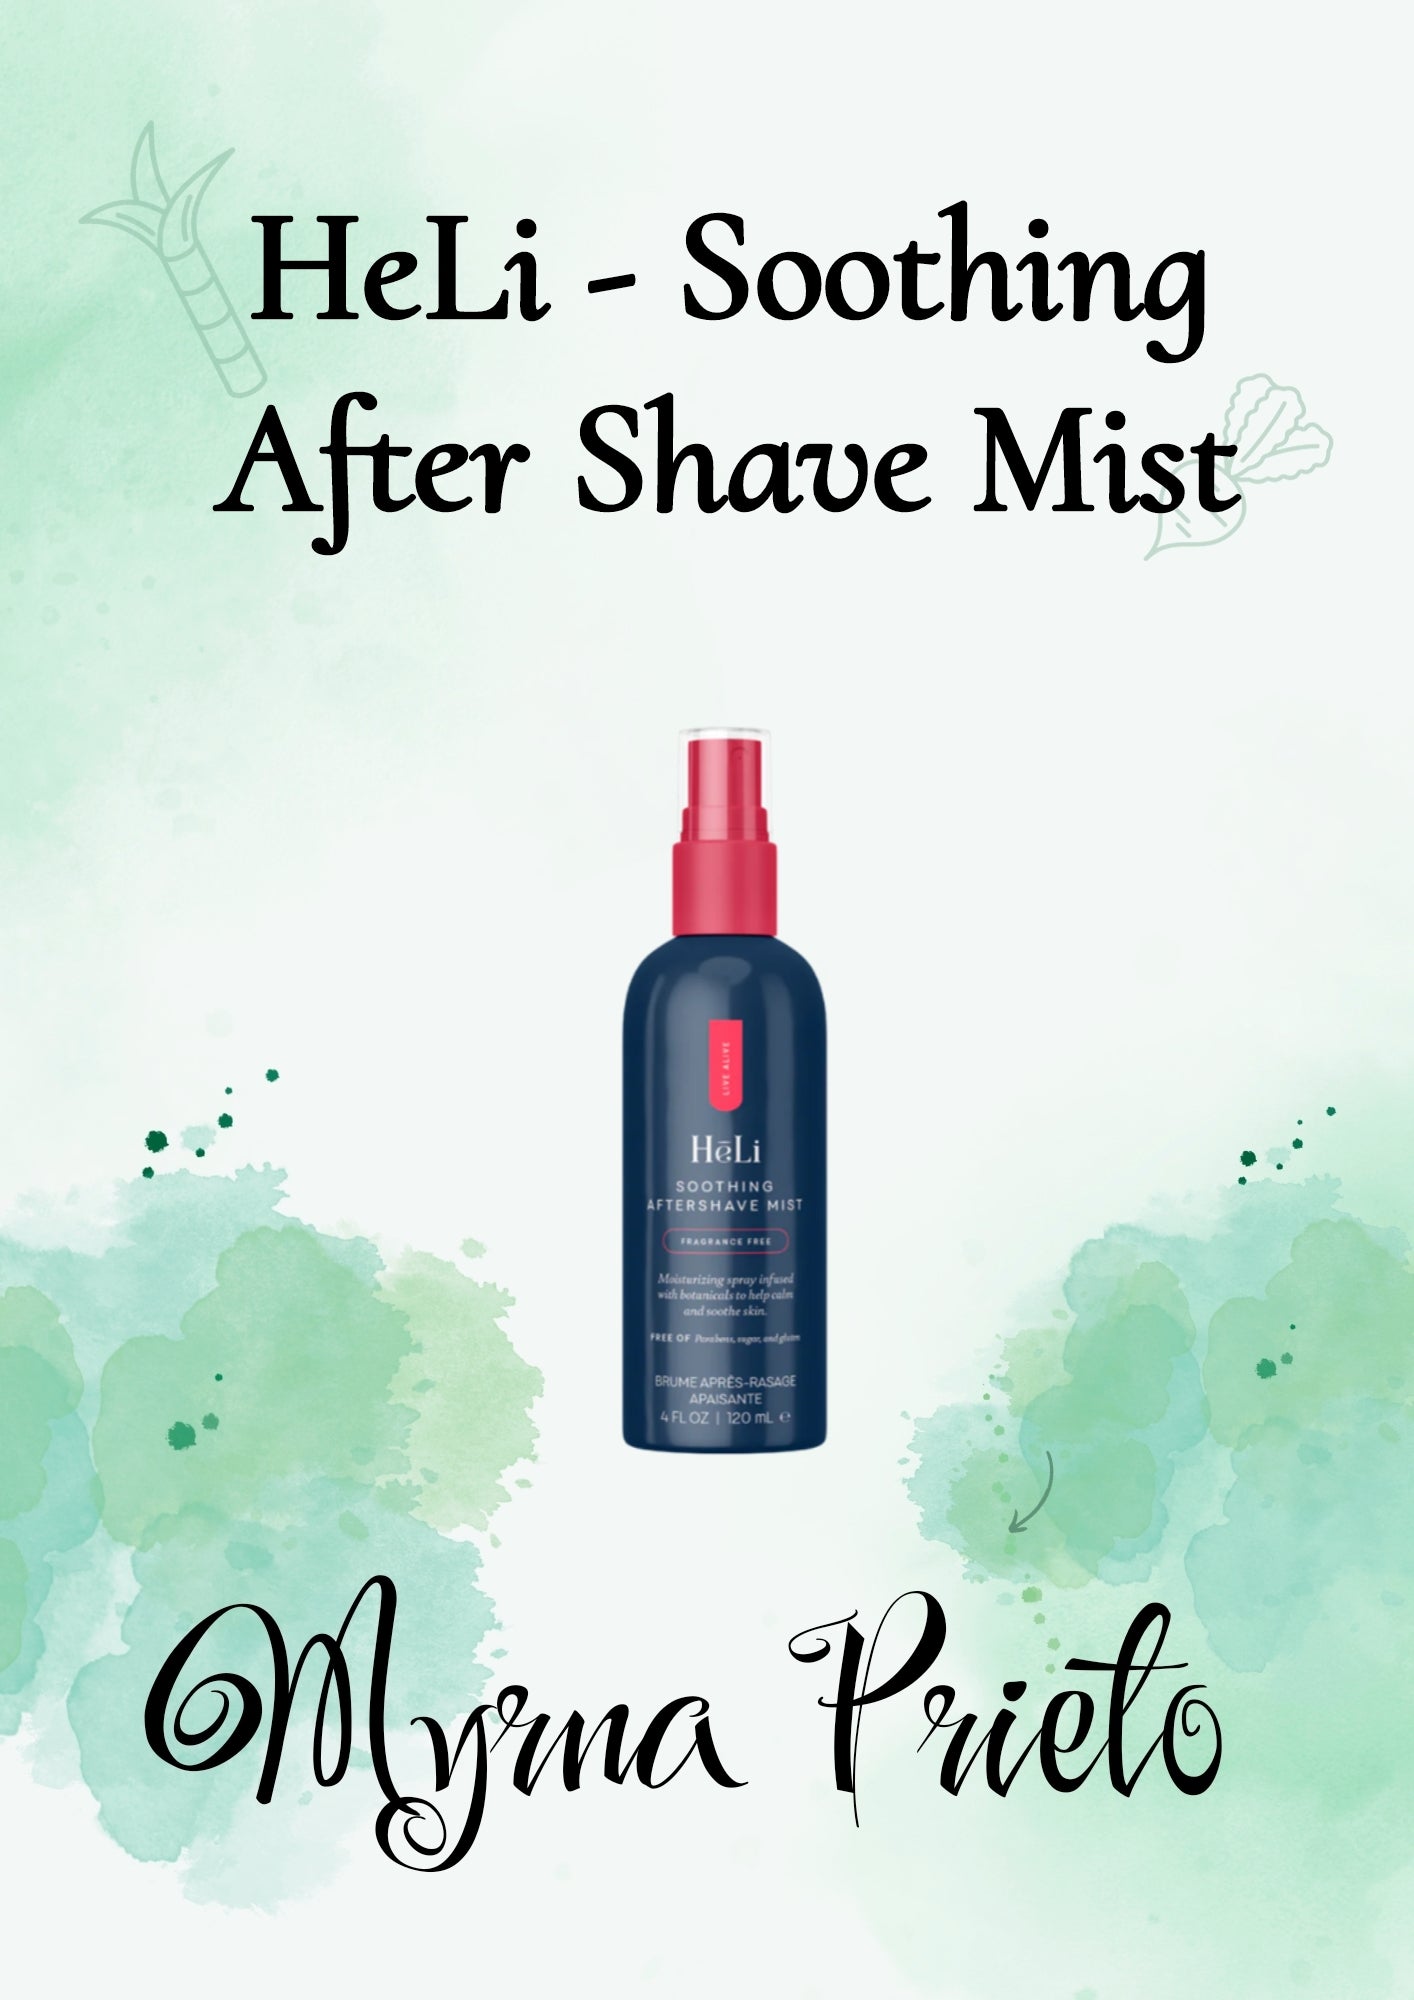 HeLi - Soothing After Shave Mist